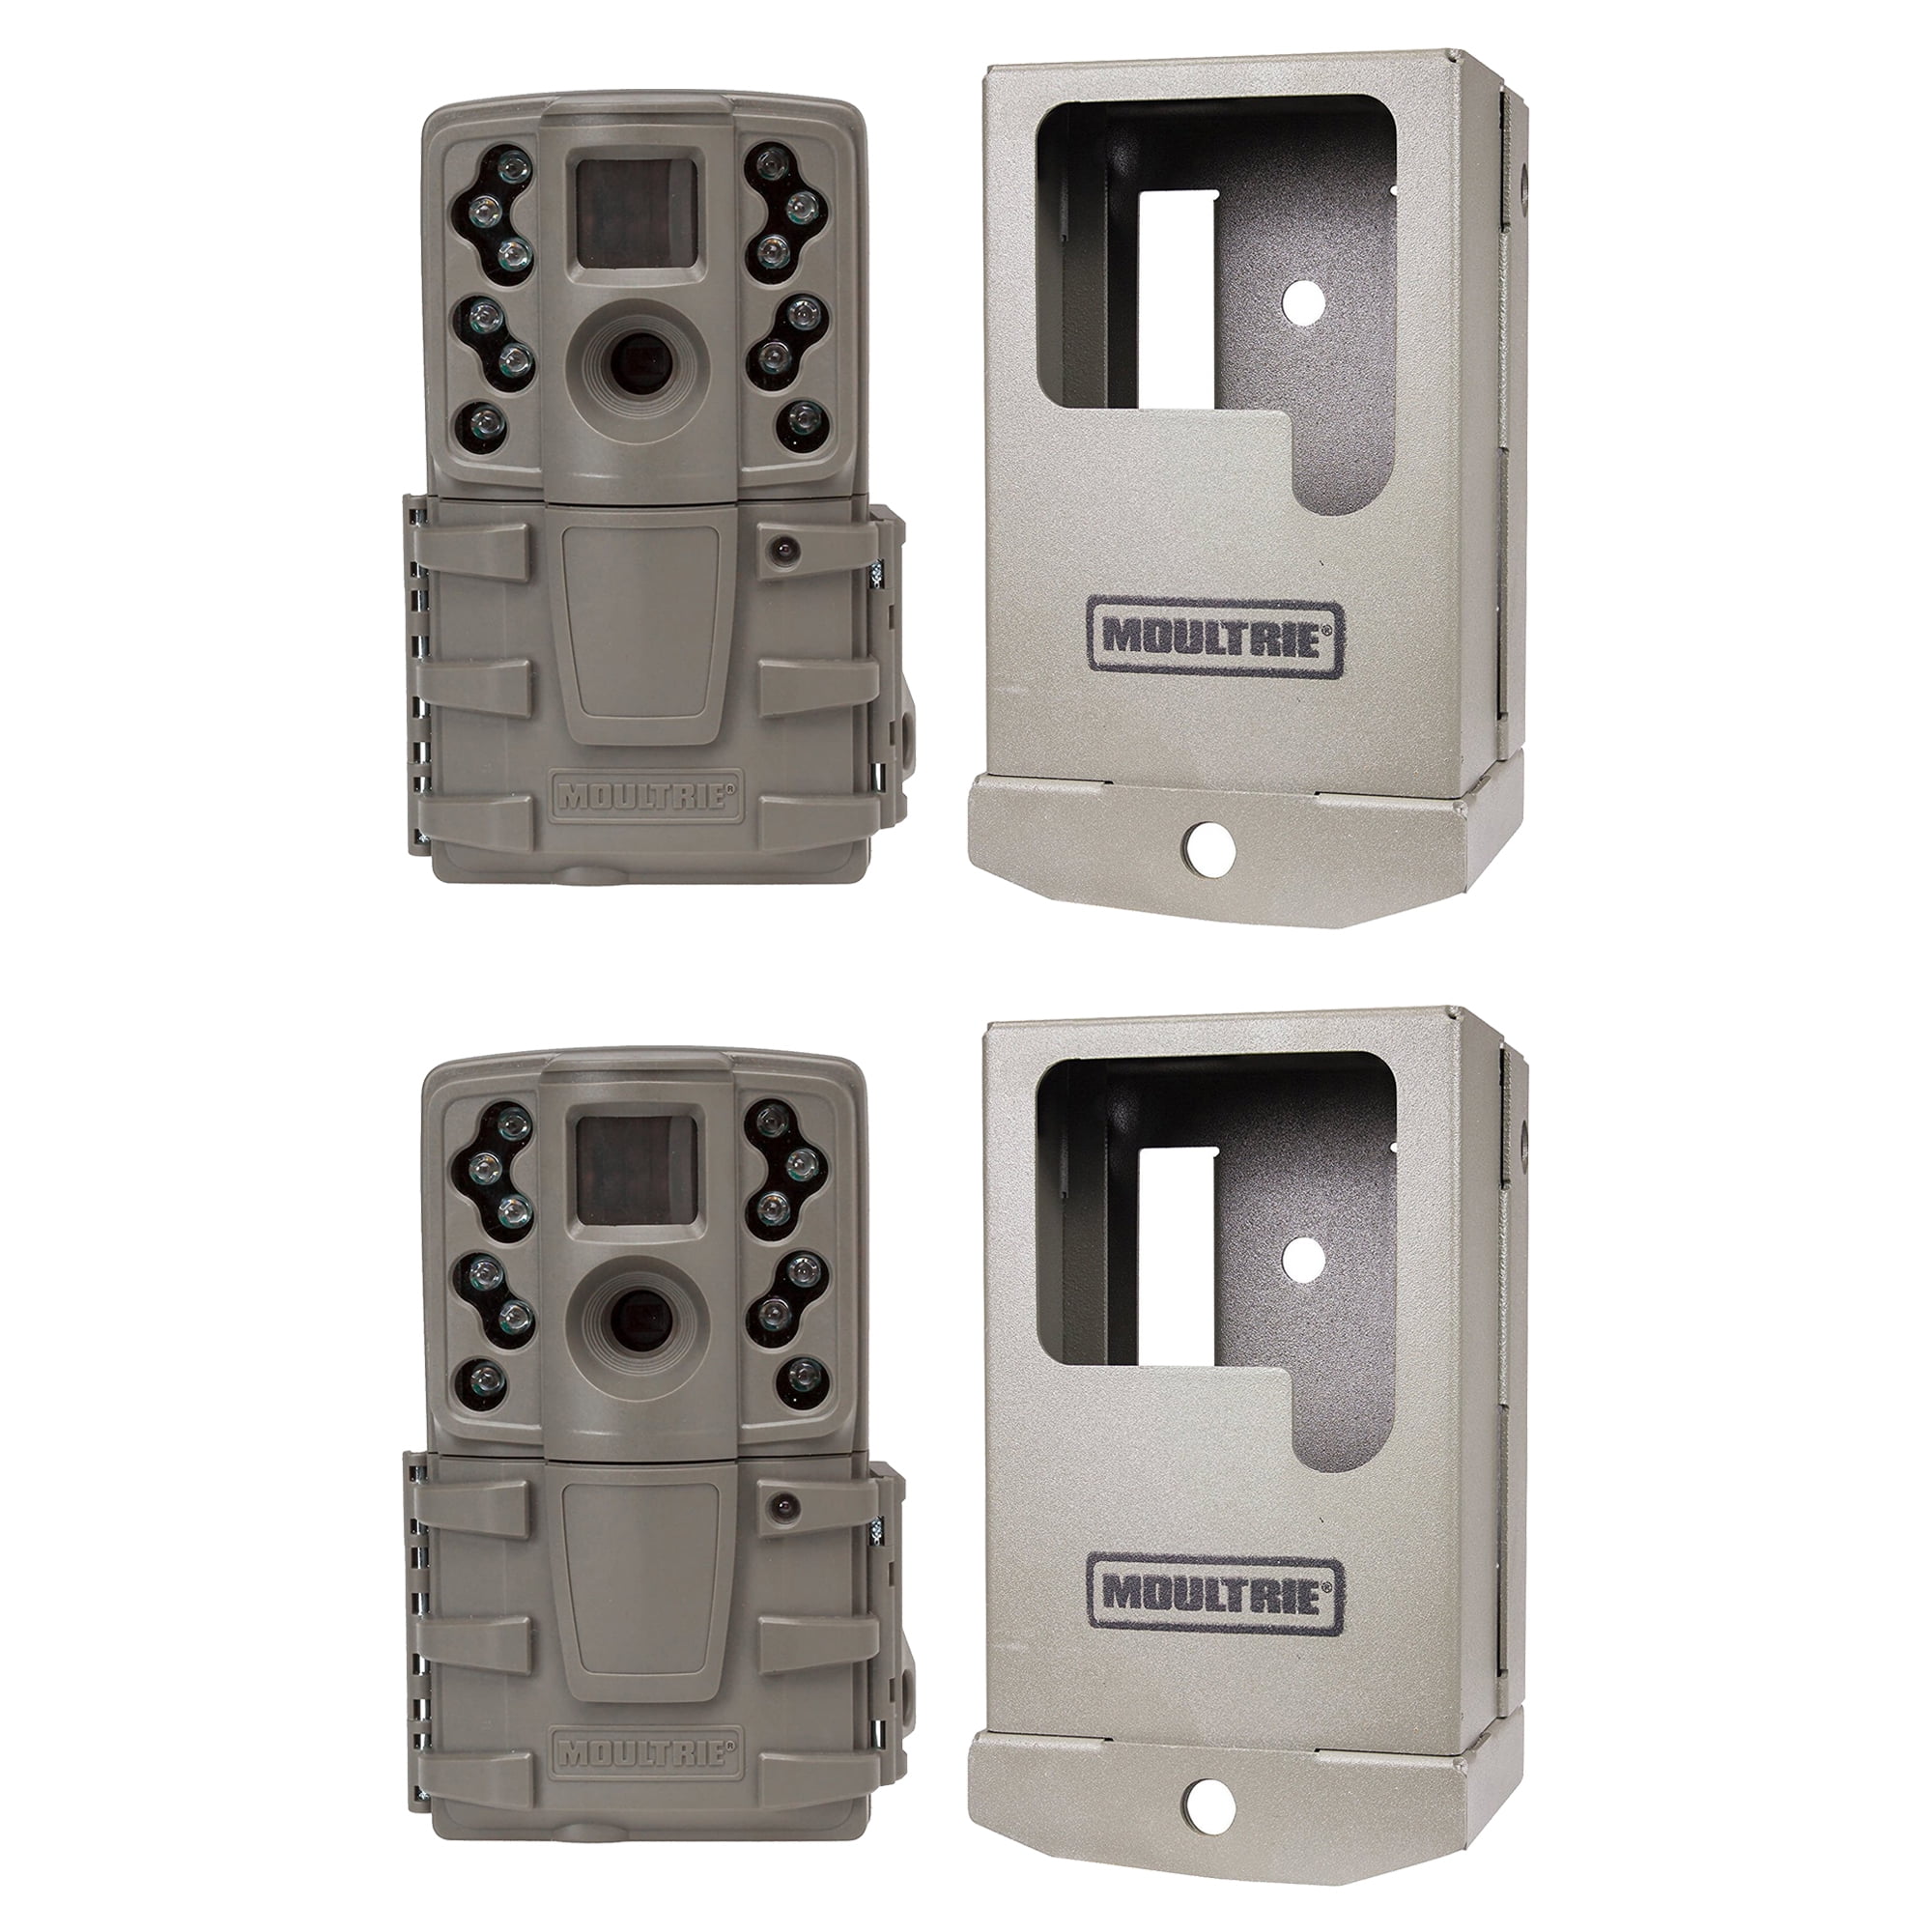 12mp Moultrie A-25i Game Camera A-Series compatible with moultrie mobile 